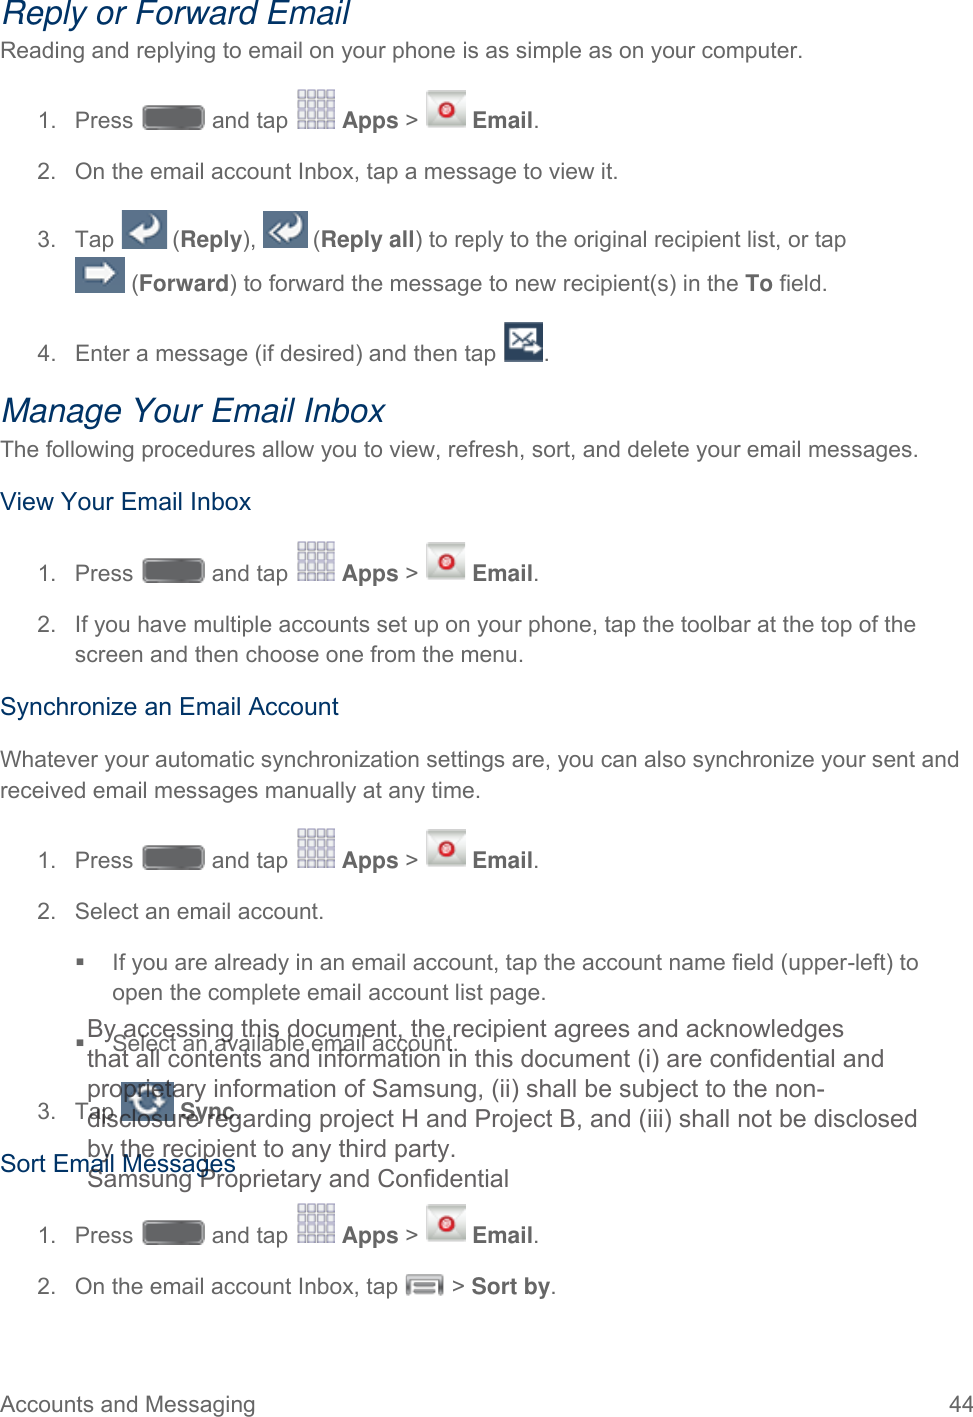  Accounts and Messaging 44   Reply or Forward Email Reading and replying to email on your phone is as simple as on your computer. 1.  Press   and tap   Apps &gt;   Email. 2. On the email account Inbox, tap a message to view it. 3. Tap   (Reply),   (Reply all) to reply to the original recipient list, or tap   (Forward) to forward the message to new recipient(s) in the To field. 4. Enter a message (if desired) and then tap  . Manage Your Email Inbox The following procedures allow you to view, refresh, sort, and delete your email messages. View Your Email Inbox 1.  Press   and tap   Apps &gt;   Email. 2. If you have multiple accounts set up on your phone, tap the toolbar at the top of the screen and then choose one from the menu. Synchronize an Email Account Whatever your automatic synchronization settings are, you can also synchronize your sent and received email messages manually at any time. 1.  Press   and tap   Apps &gt;   Email. 2. Select an email account.   If you are already in an email account, tap the account name field (upper-left) to open the complete email account list page.  Select an available email account.  3. Tap   Sync.  Sort Email Messages 1.  Press   and tap   Apps &gt;   Email. 2. On the email account Inbox, tap  &gt; Sort by. By accessing this document, the recipient agrees and acknowledges that all contents and information in this document (i) are confidential and proprietary information of Samsung, (ii) shall be subject to the non- disclosure regarding project H and Project B, and (iii) shall not be disclosed by the recipient to any third party. Samsung Proprietary and Confidential 